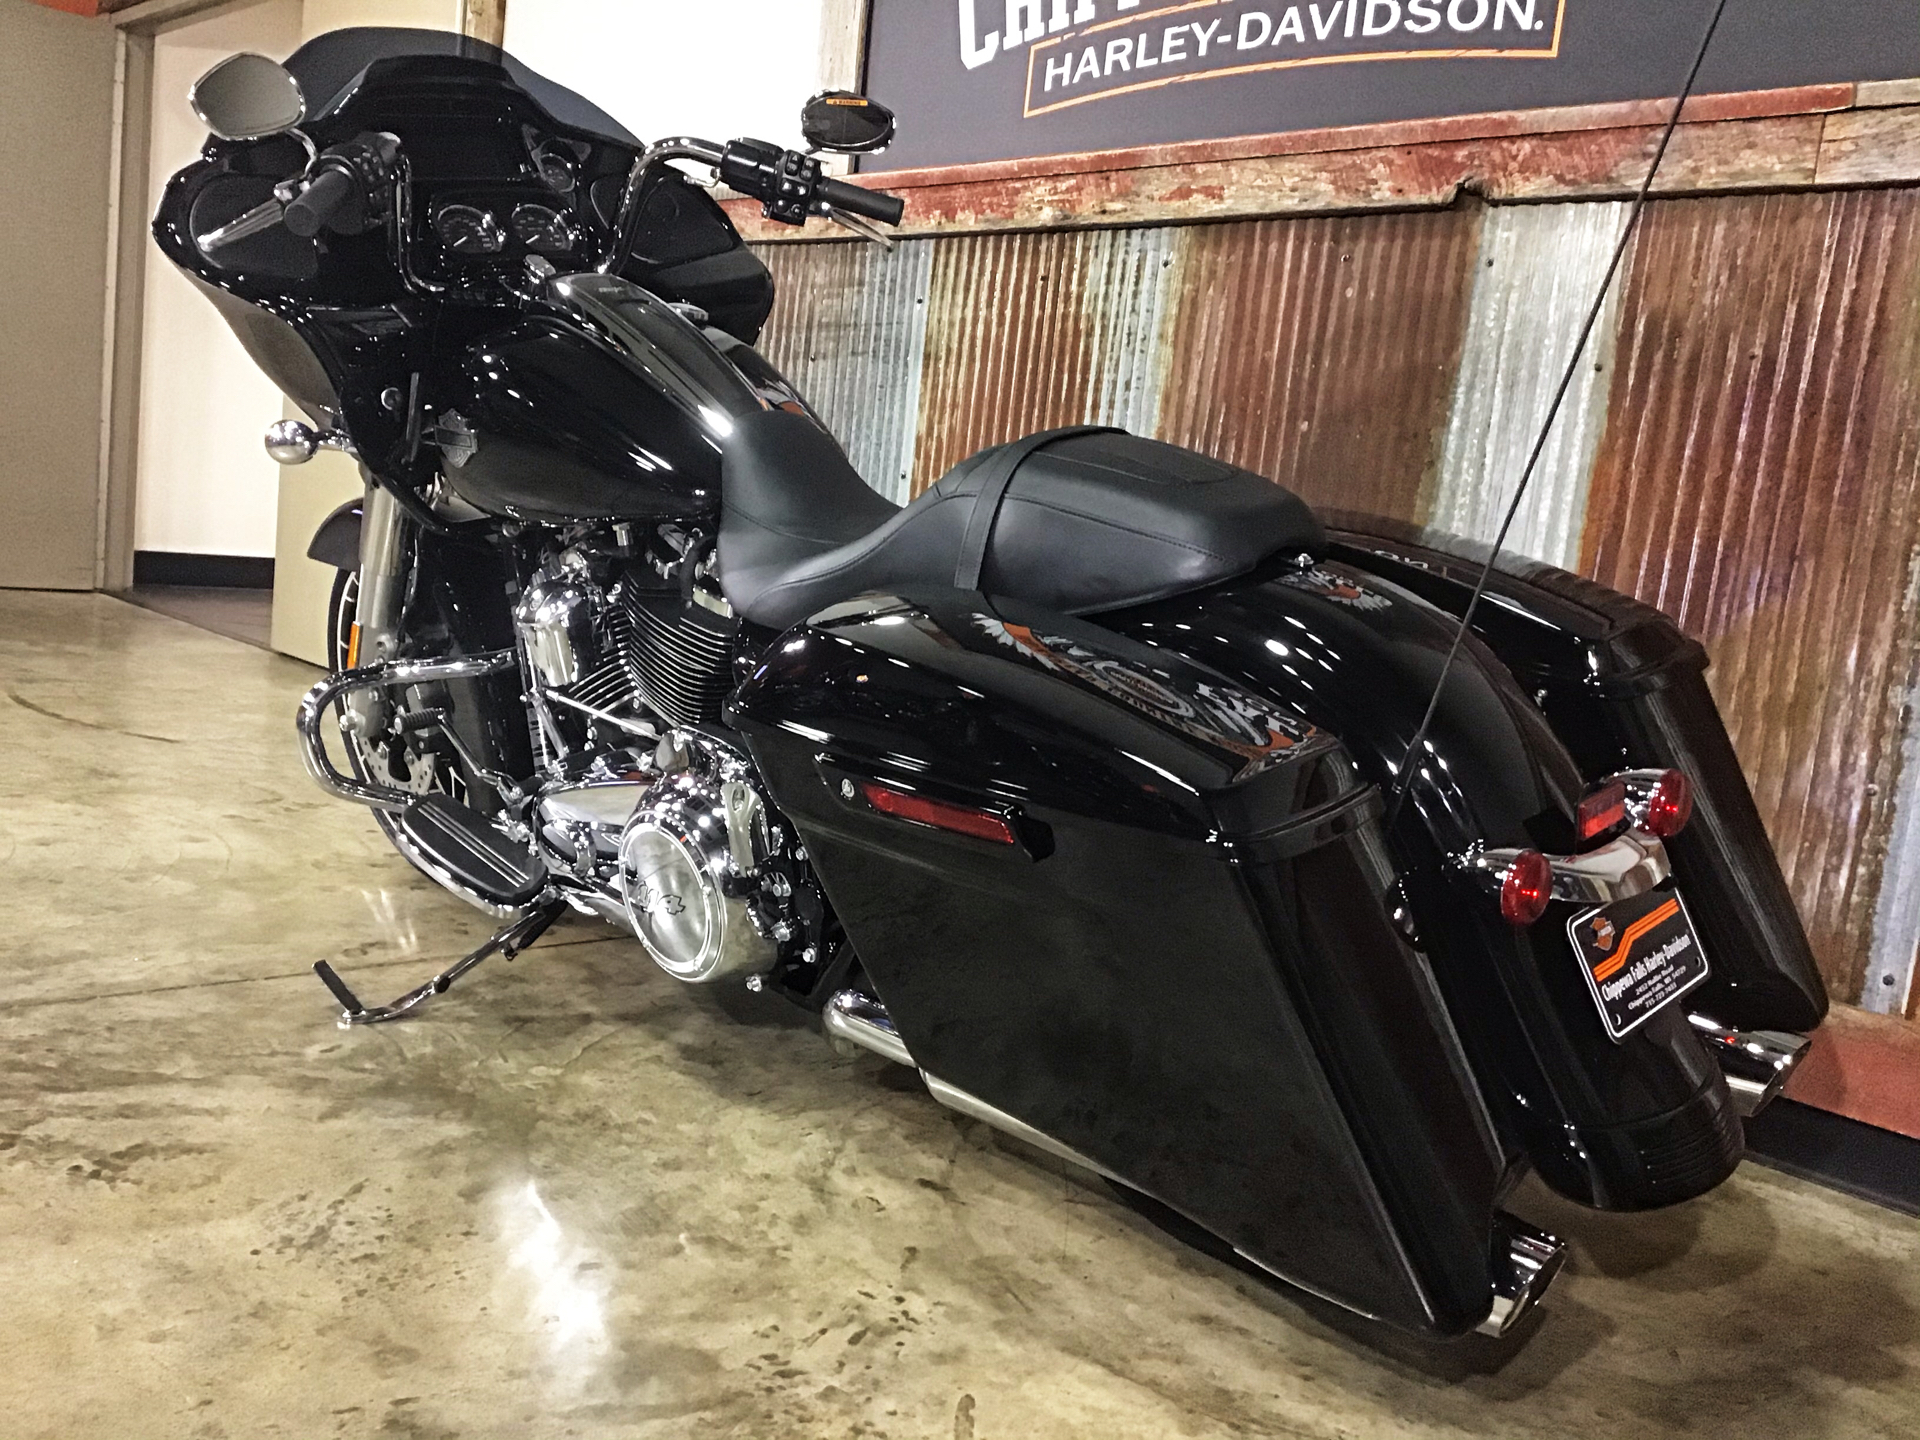 New 2021 Harley Davidson Road Glide Special Vivid Black Chrome Option Motorcycles In Chippewa Falls Wi Fl649107